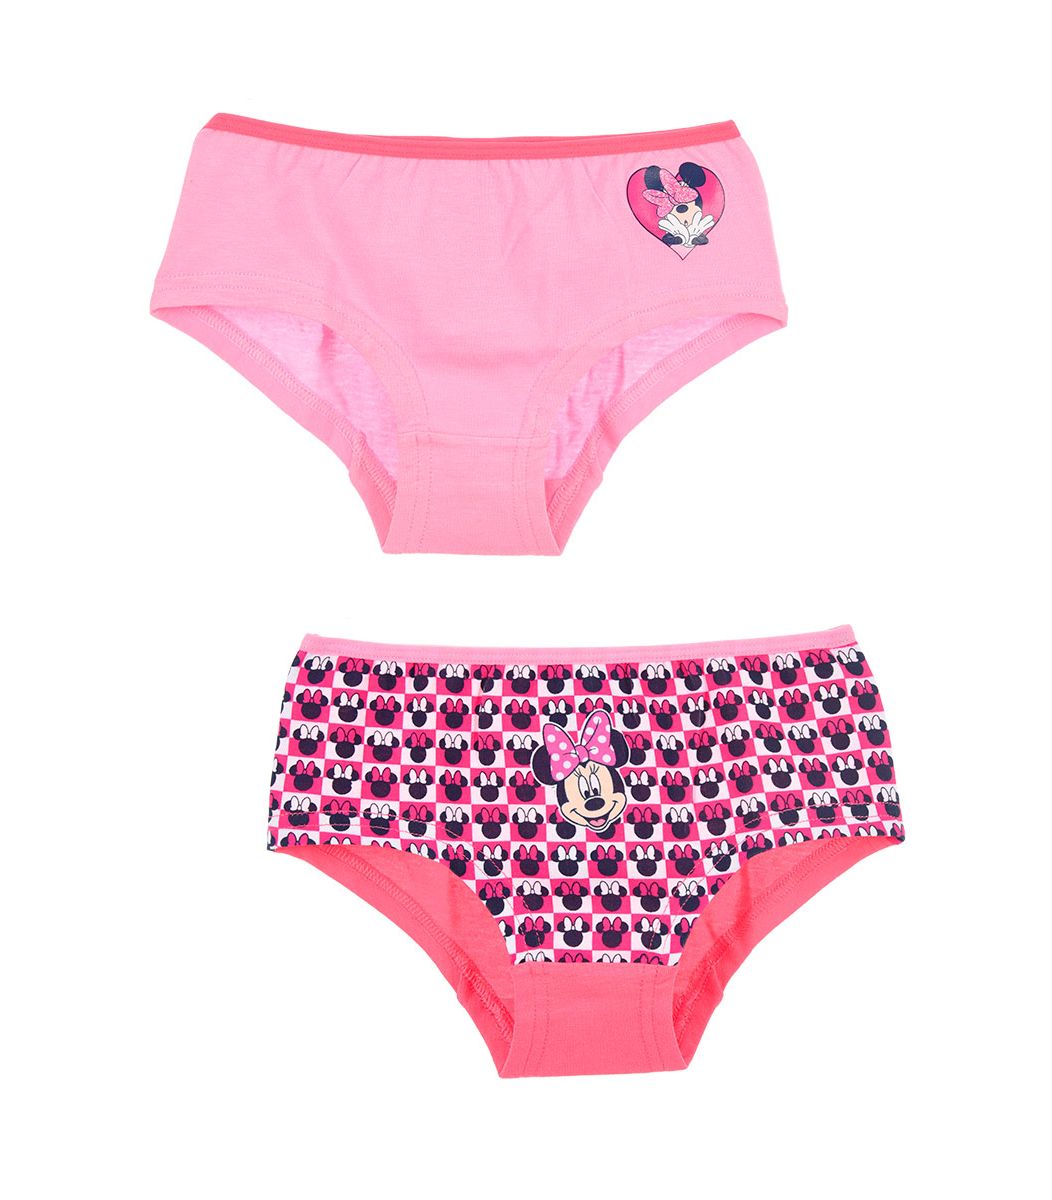 Disney Set 2 girls boxers Minnie Color Pink Size 2yrs old